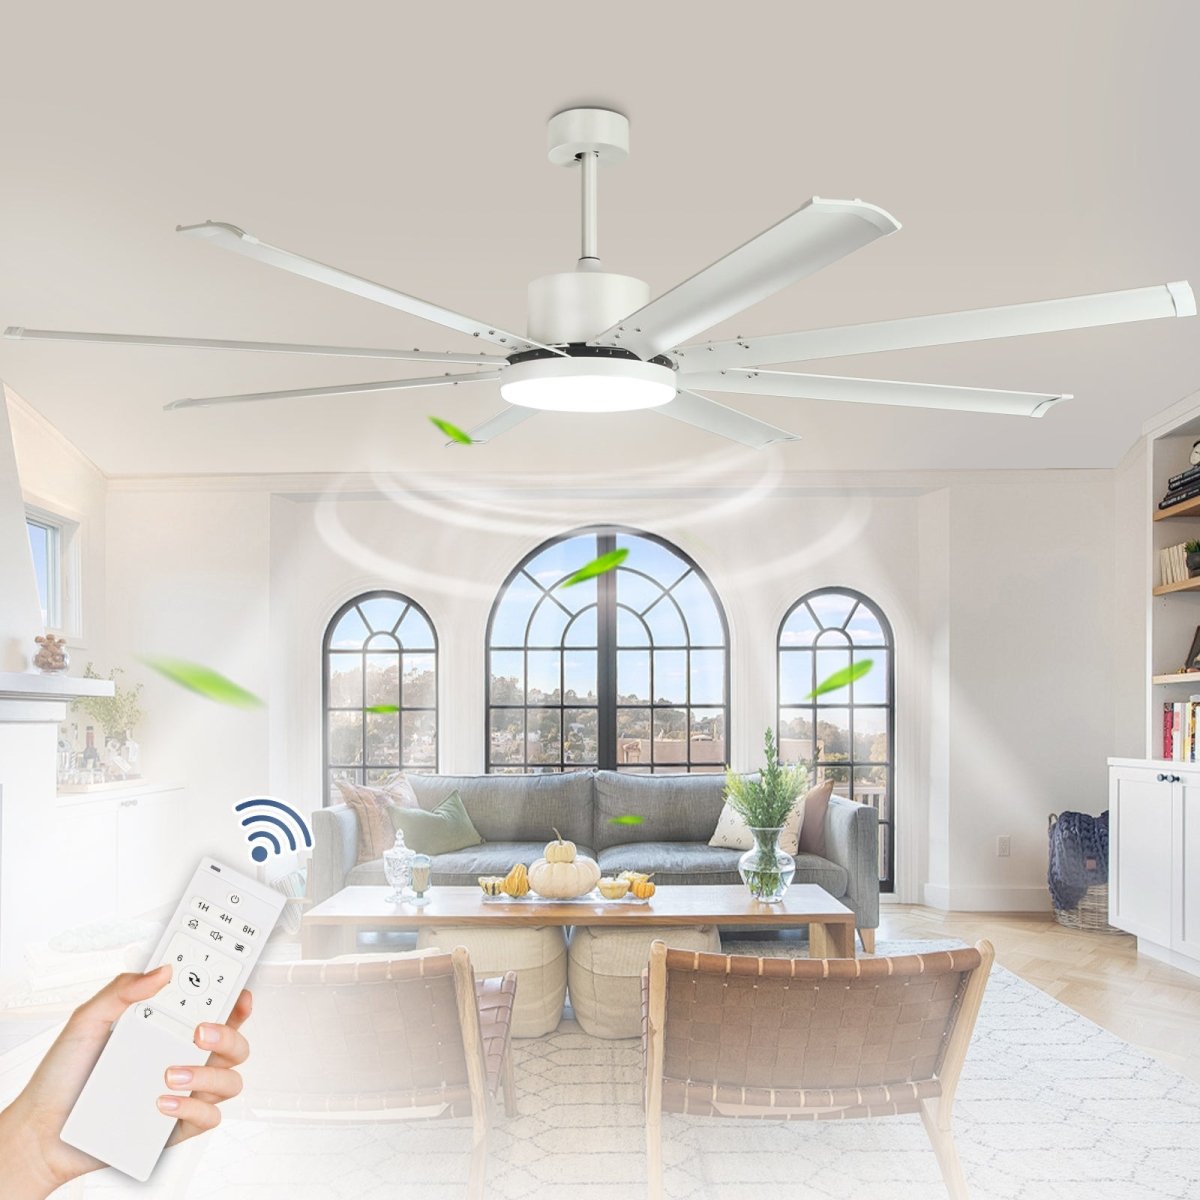 80 Inch Ceiling Fans with Lights and Remote, White Large Ceiling Fan, 6-Speed 8 Aluminum Reversible Blades DC Motor, Industrial Ceiling Fan for Kitchen Living Room Playroom Indoor/Outdoor - WS-FPZ58-24C-8-W 2 | DEPULEY